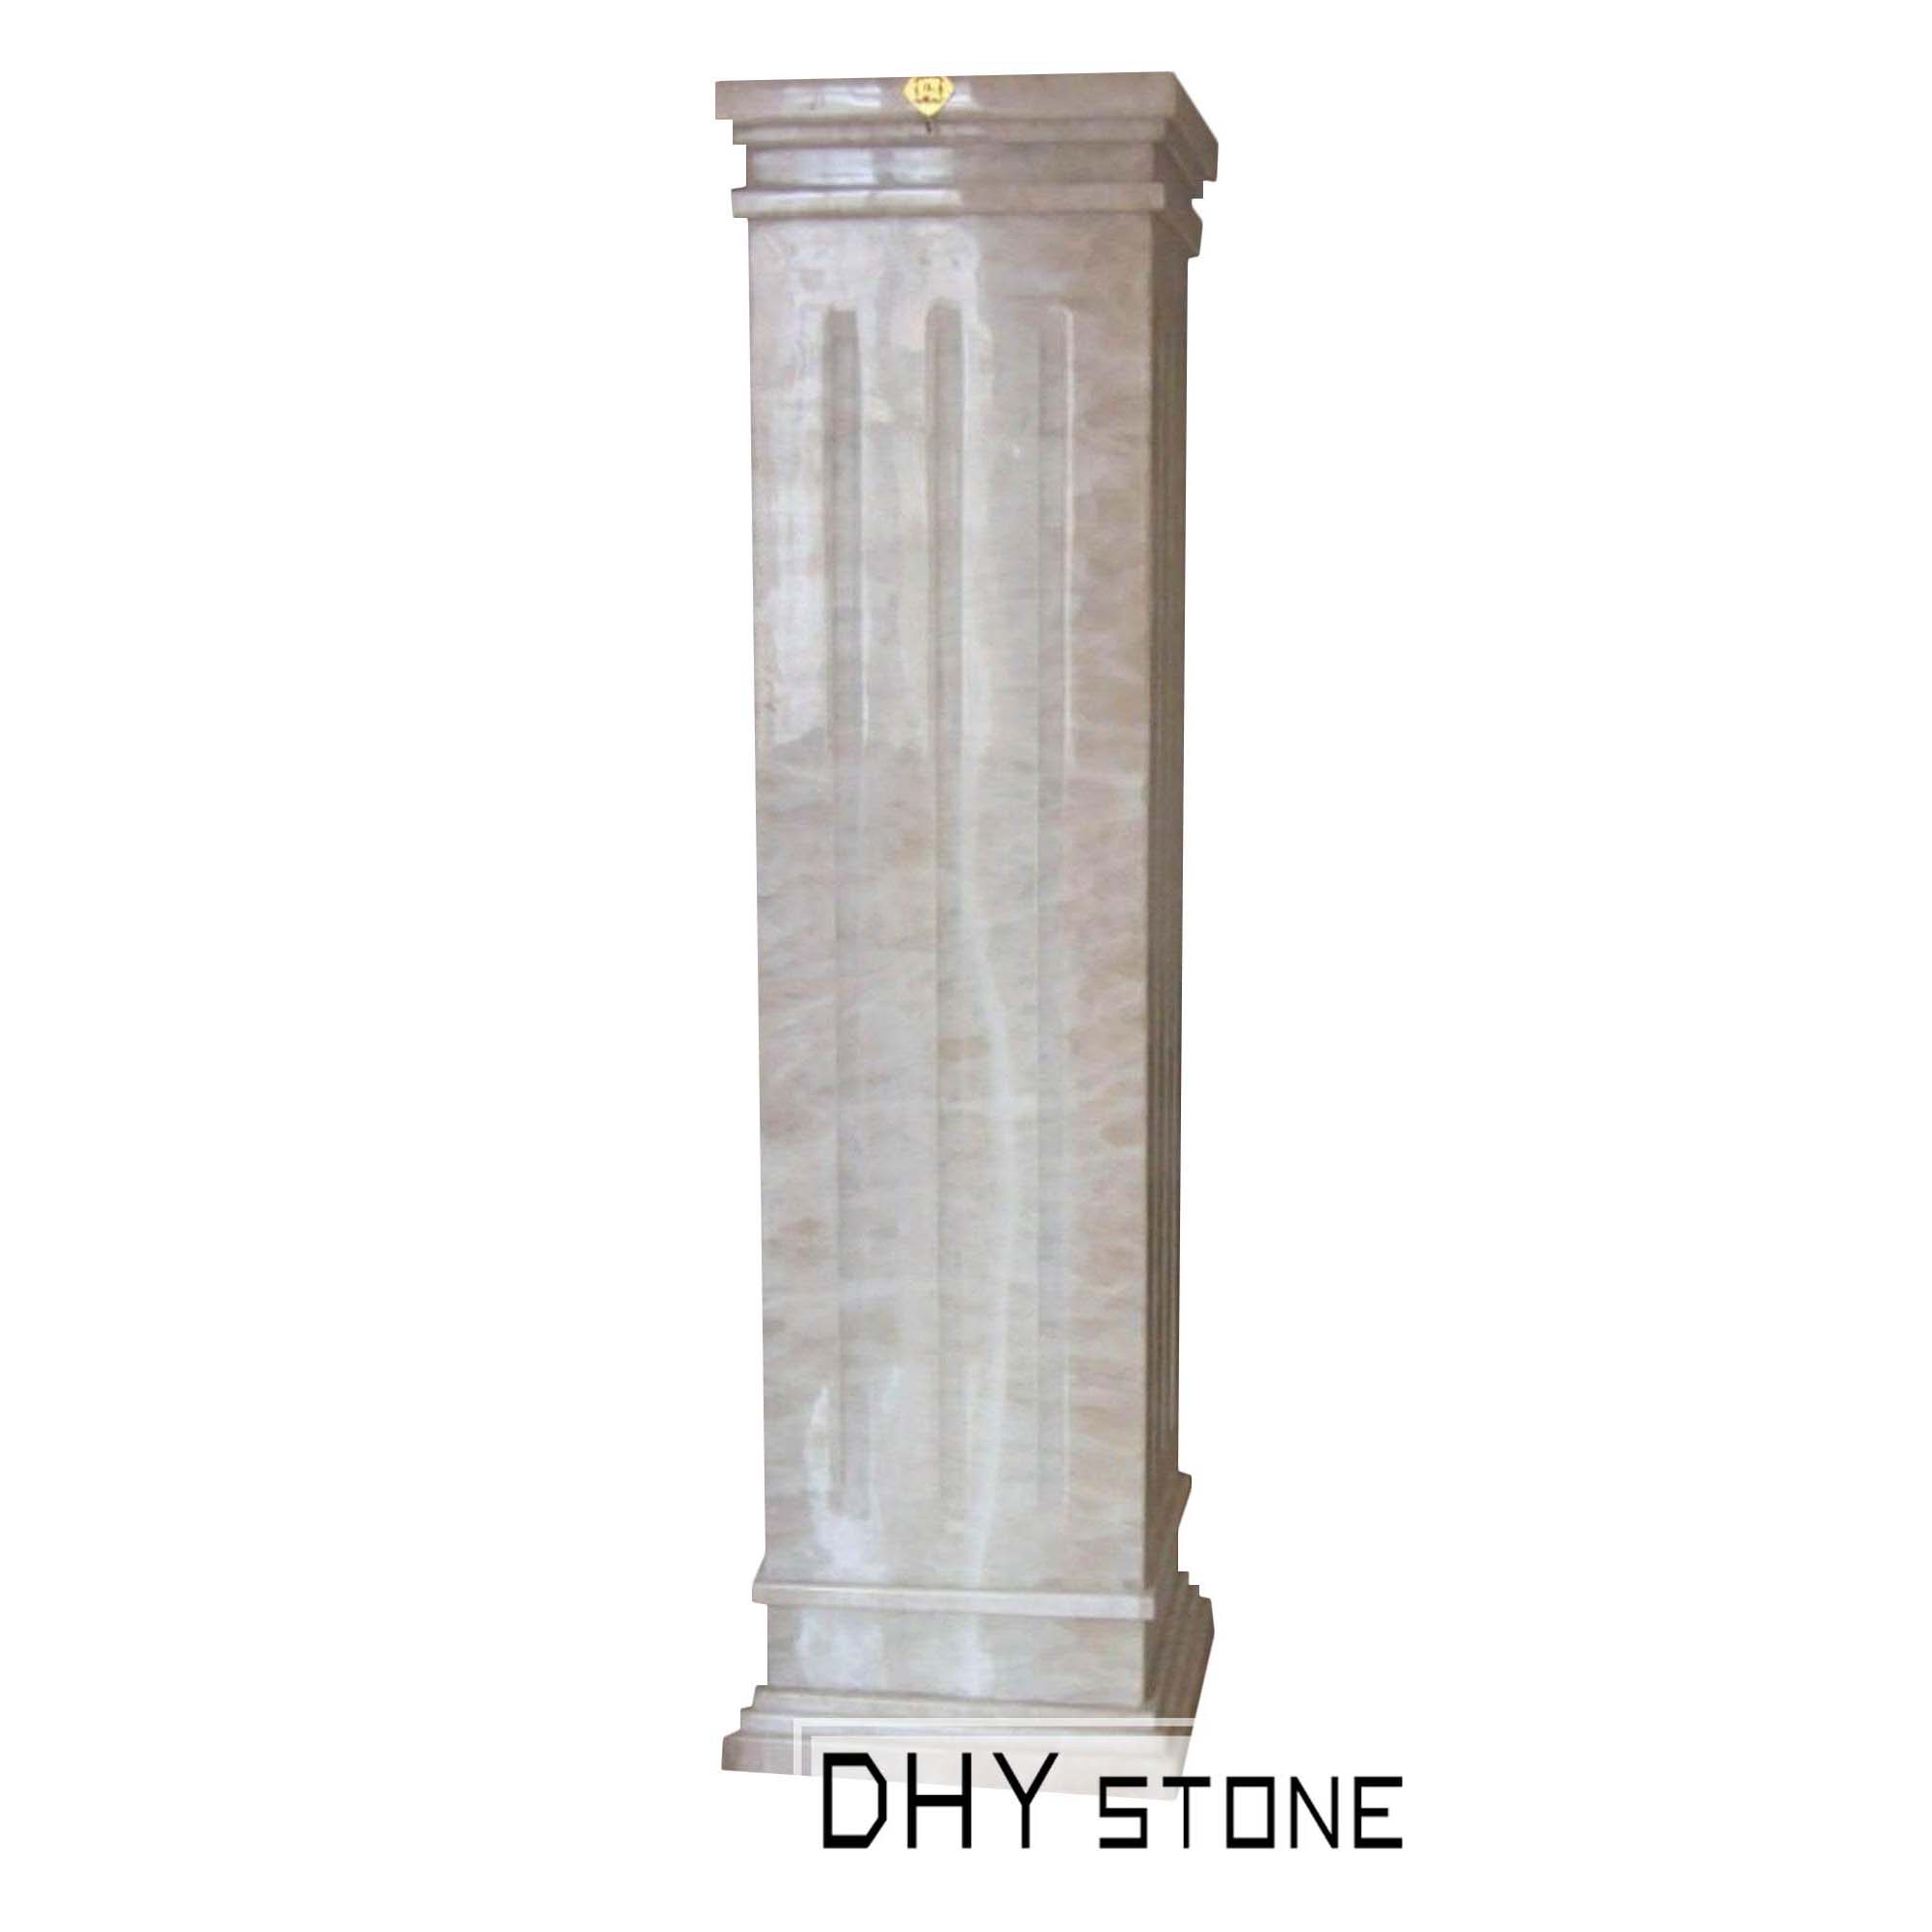 Pillar 07 - DHY stone,granite and marble supplier,china stone ...